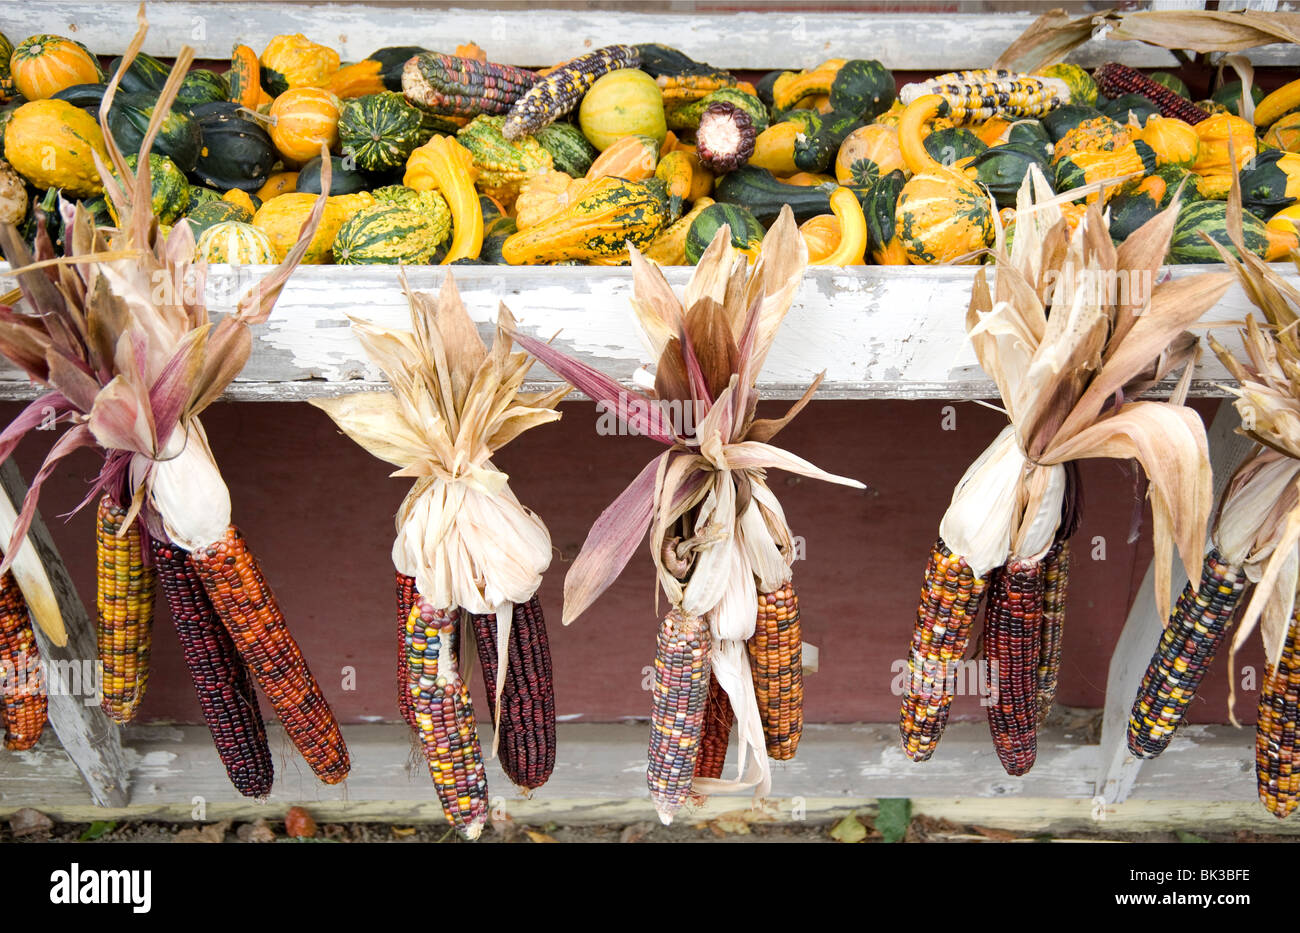 Indian corn and gourds for sale at a roadside stand in Massachusetts, New England, United States of America, North America Stock Photo